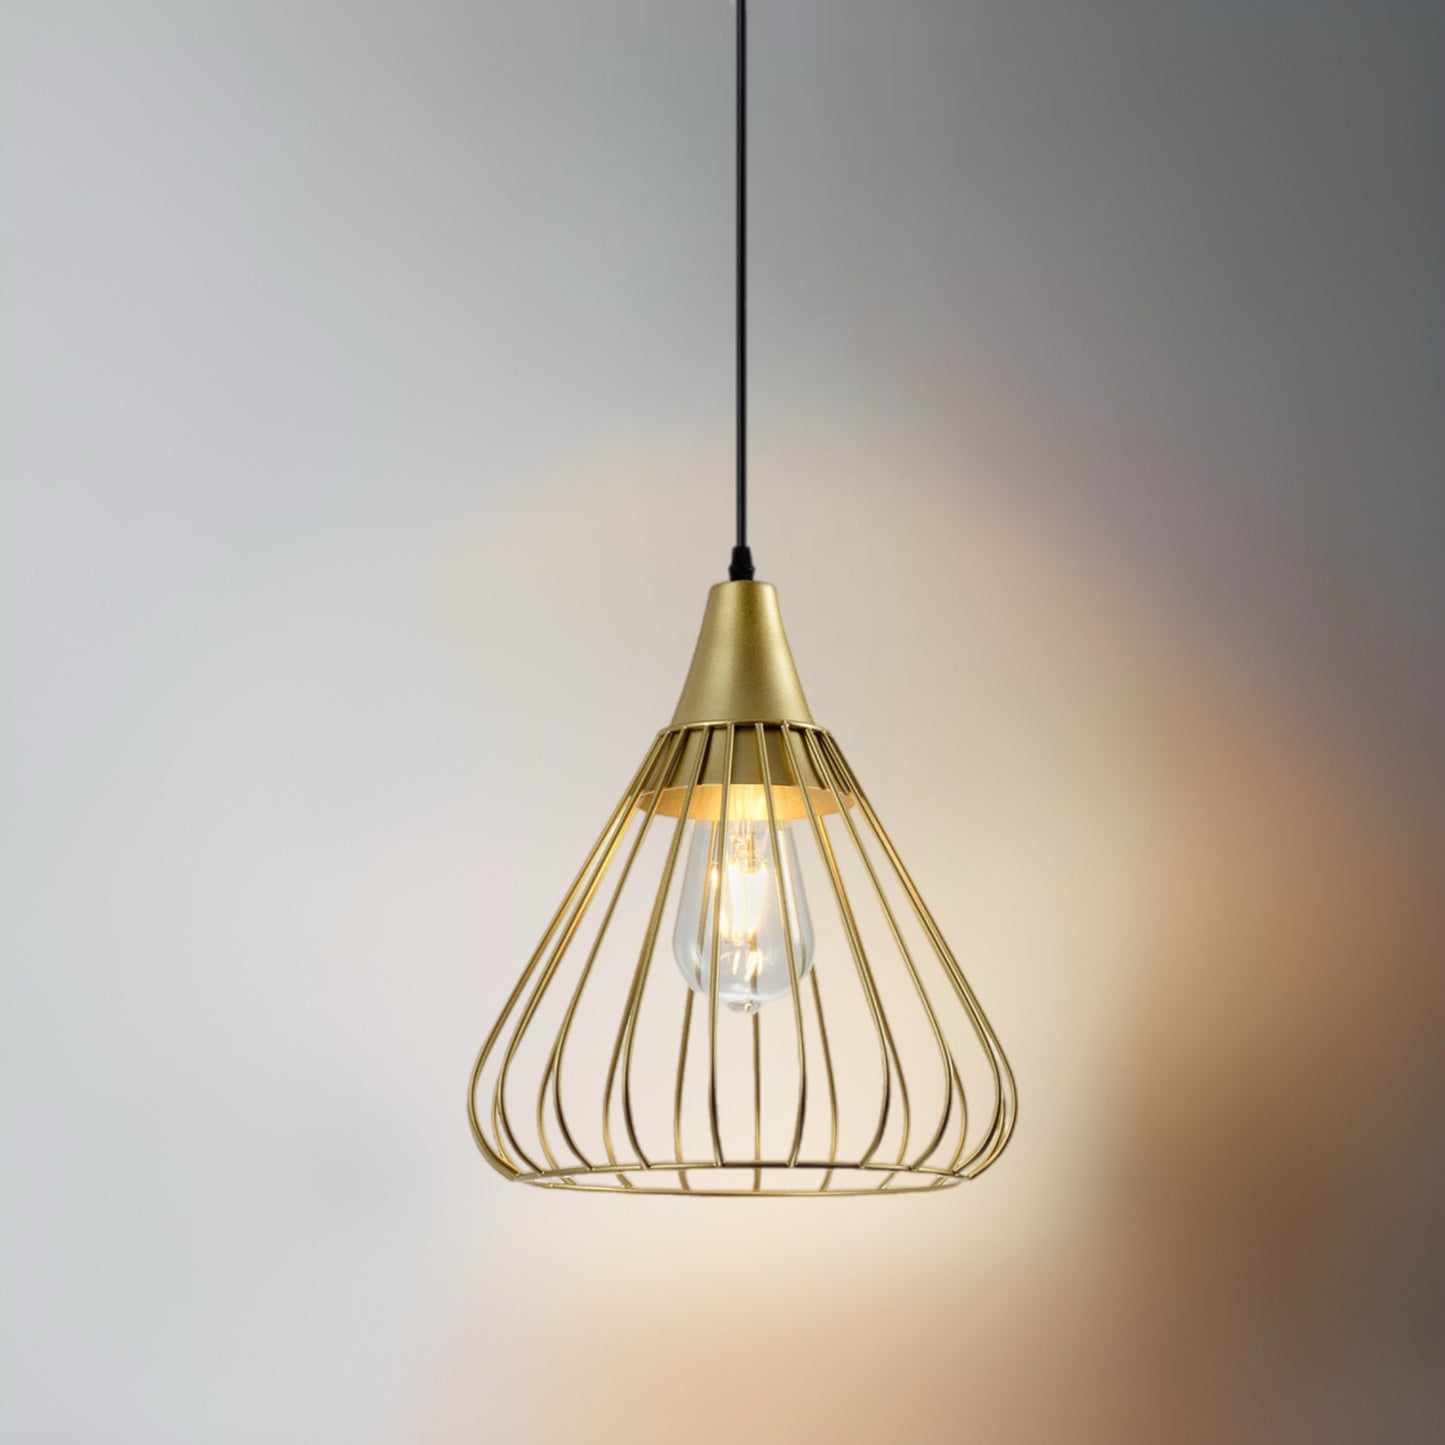 This classic light fitting a&nbsp;with large gold metal shade will perfectly fit into most home arrangements. The bulb hidden in a metal lampshade gives a very interesting visual effect when the light is turned on and the wires can be adjusted to your desired height.